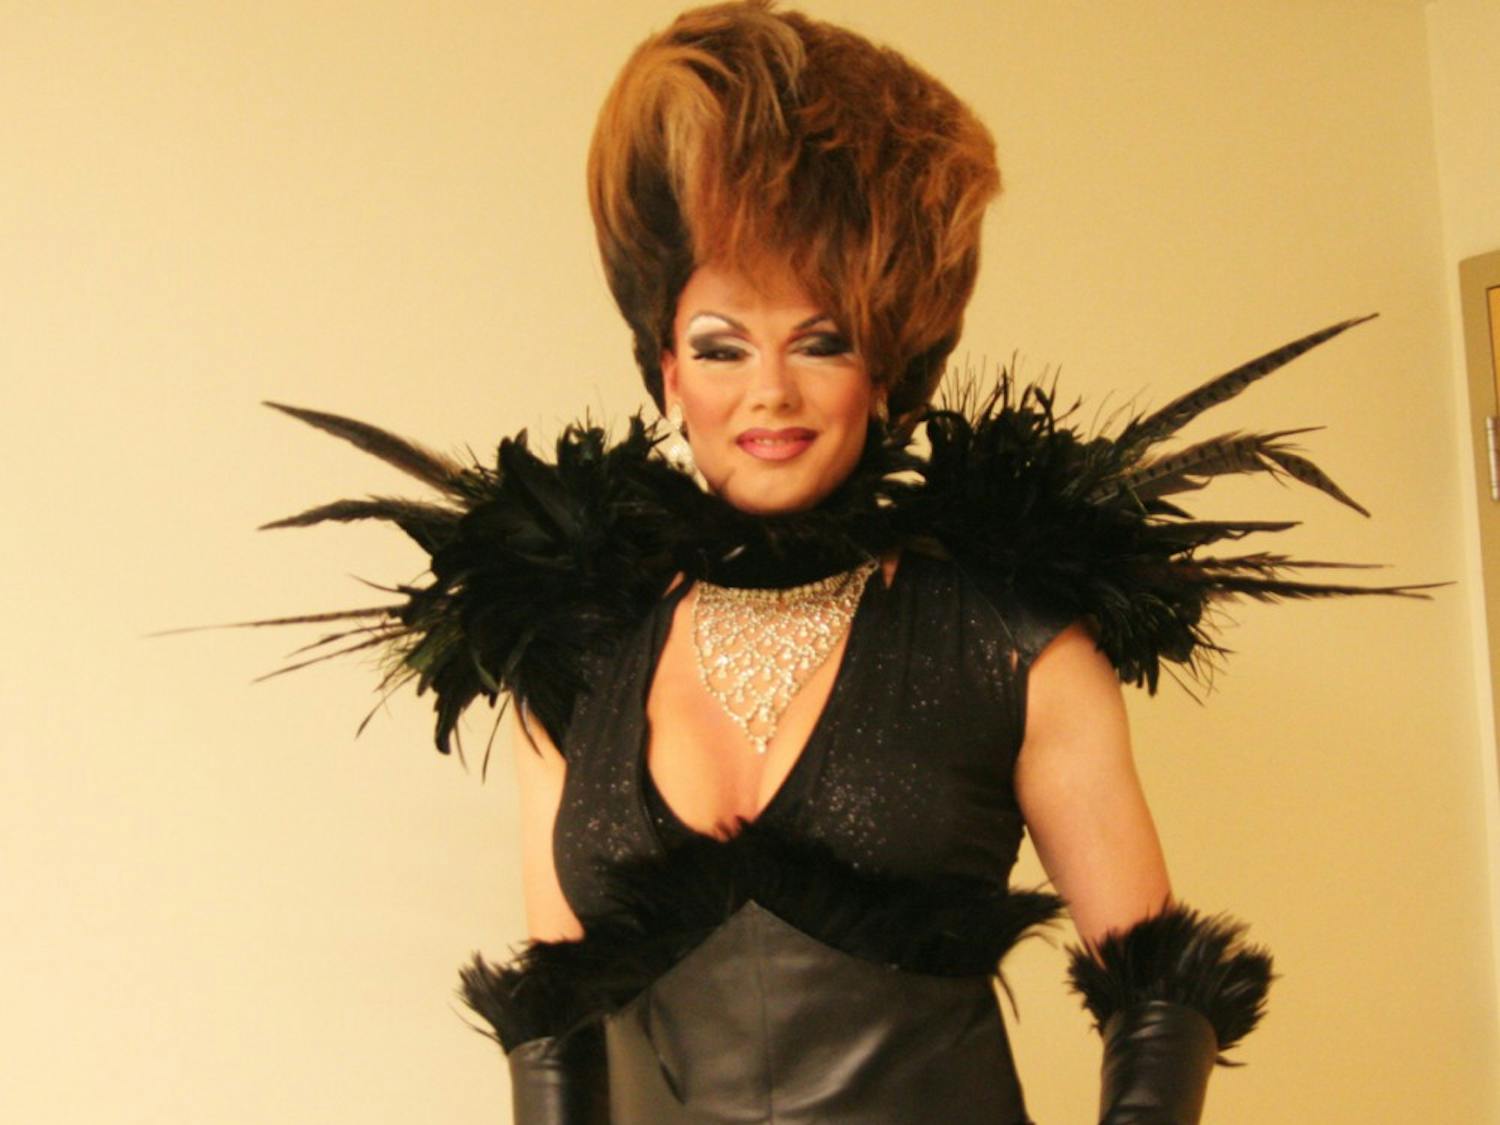 As one of the biggest hits at the drag show, UNC graduate Justin Natvig, who goes by “Vivian Vaughn,” came back to perform Thursday. 